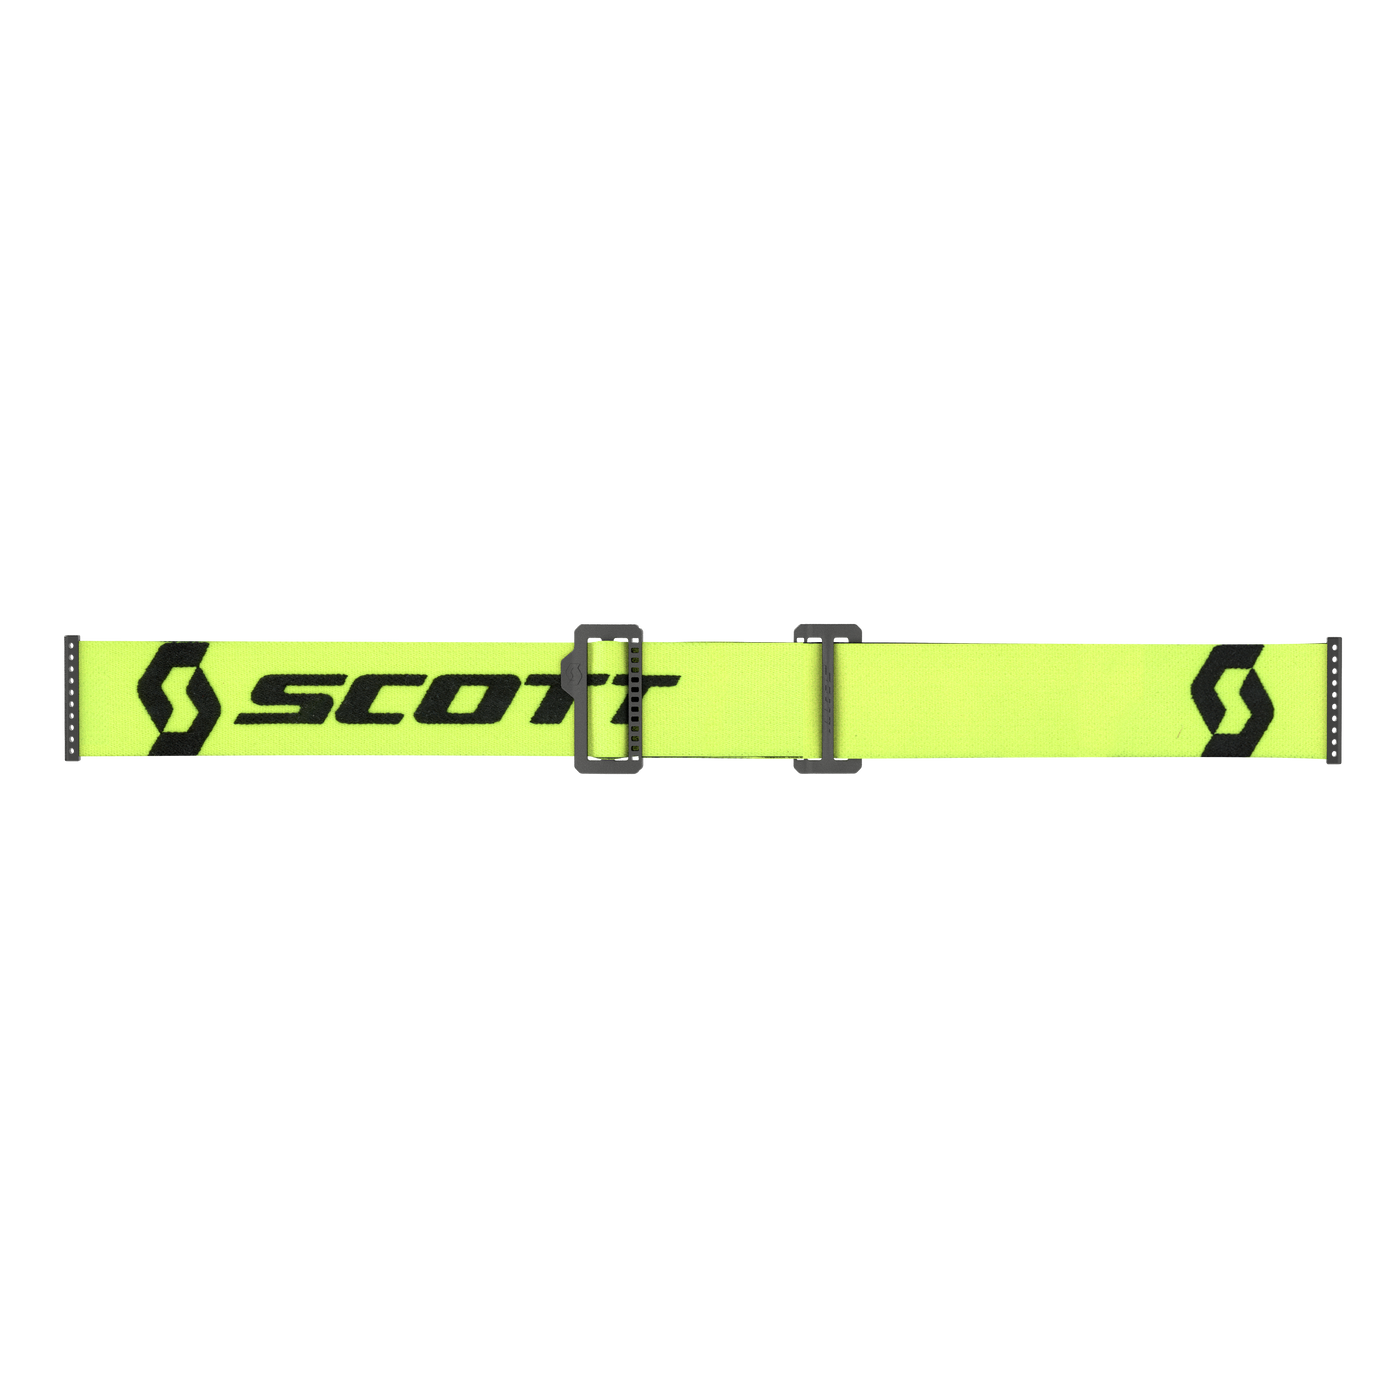 Scott Primal Goggle, Yellow / Black - Clear Works Lens